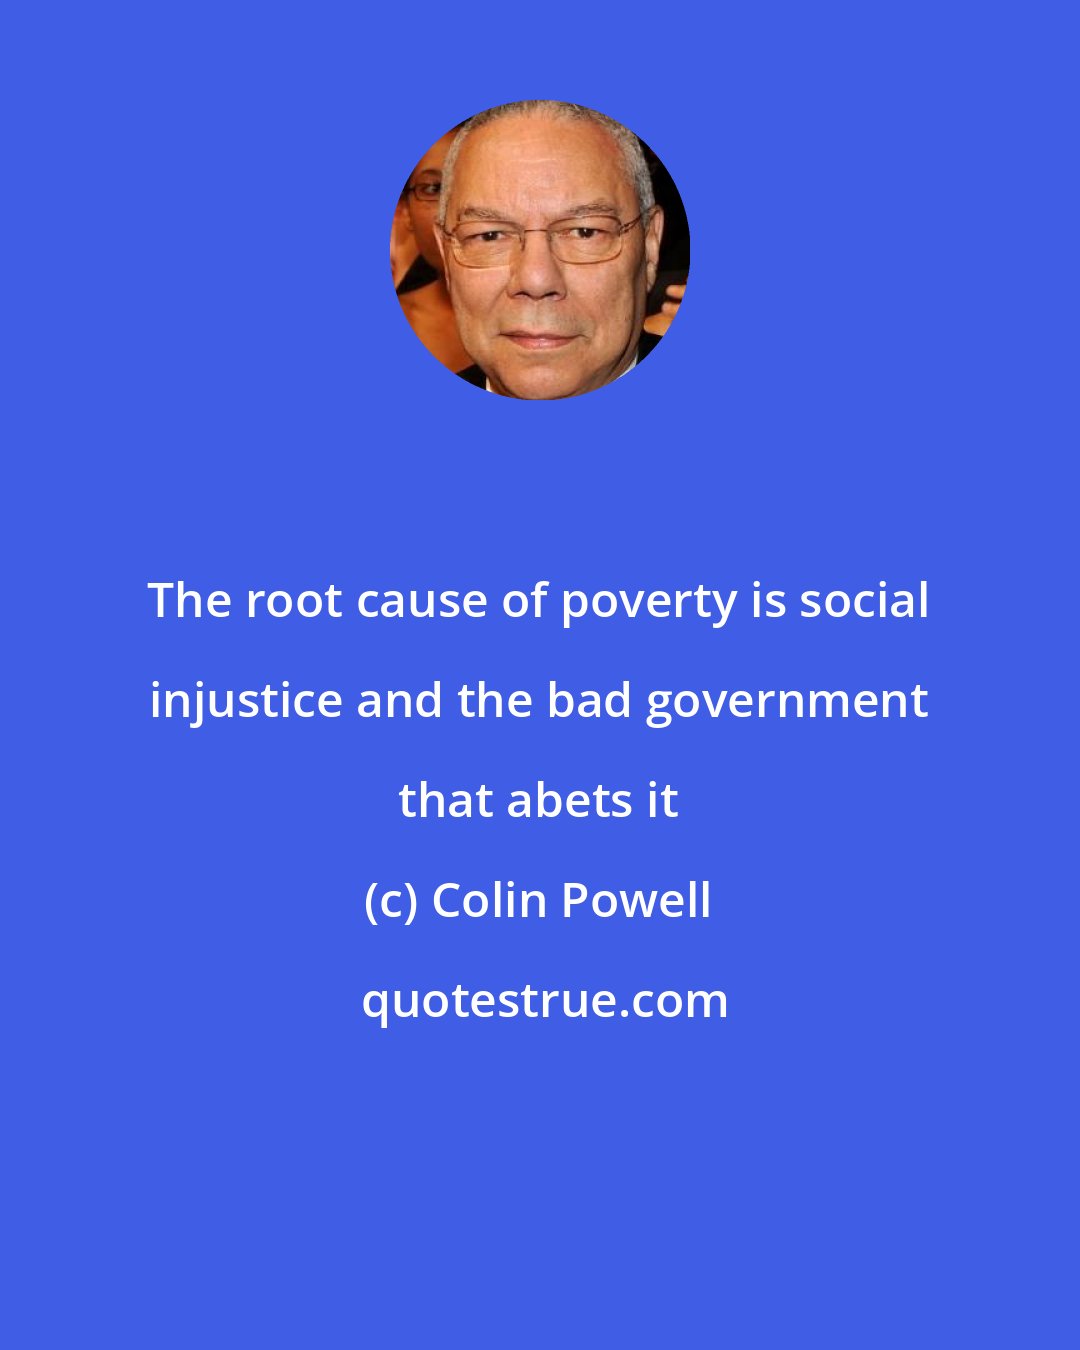 Colin Powell: The root cause of poverty is social injustice and the bad government that abets it